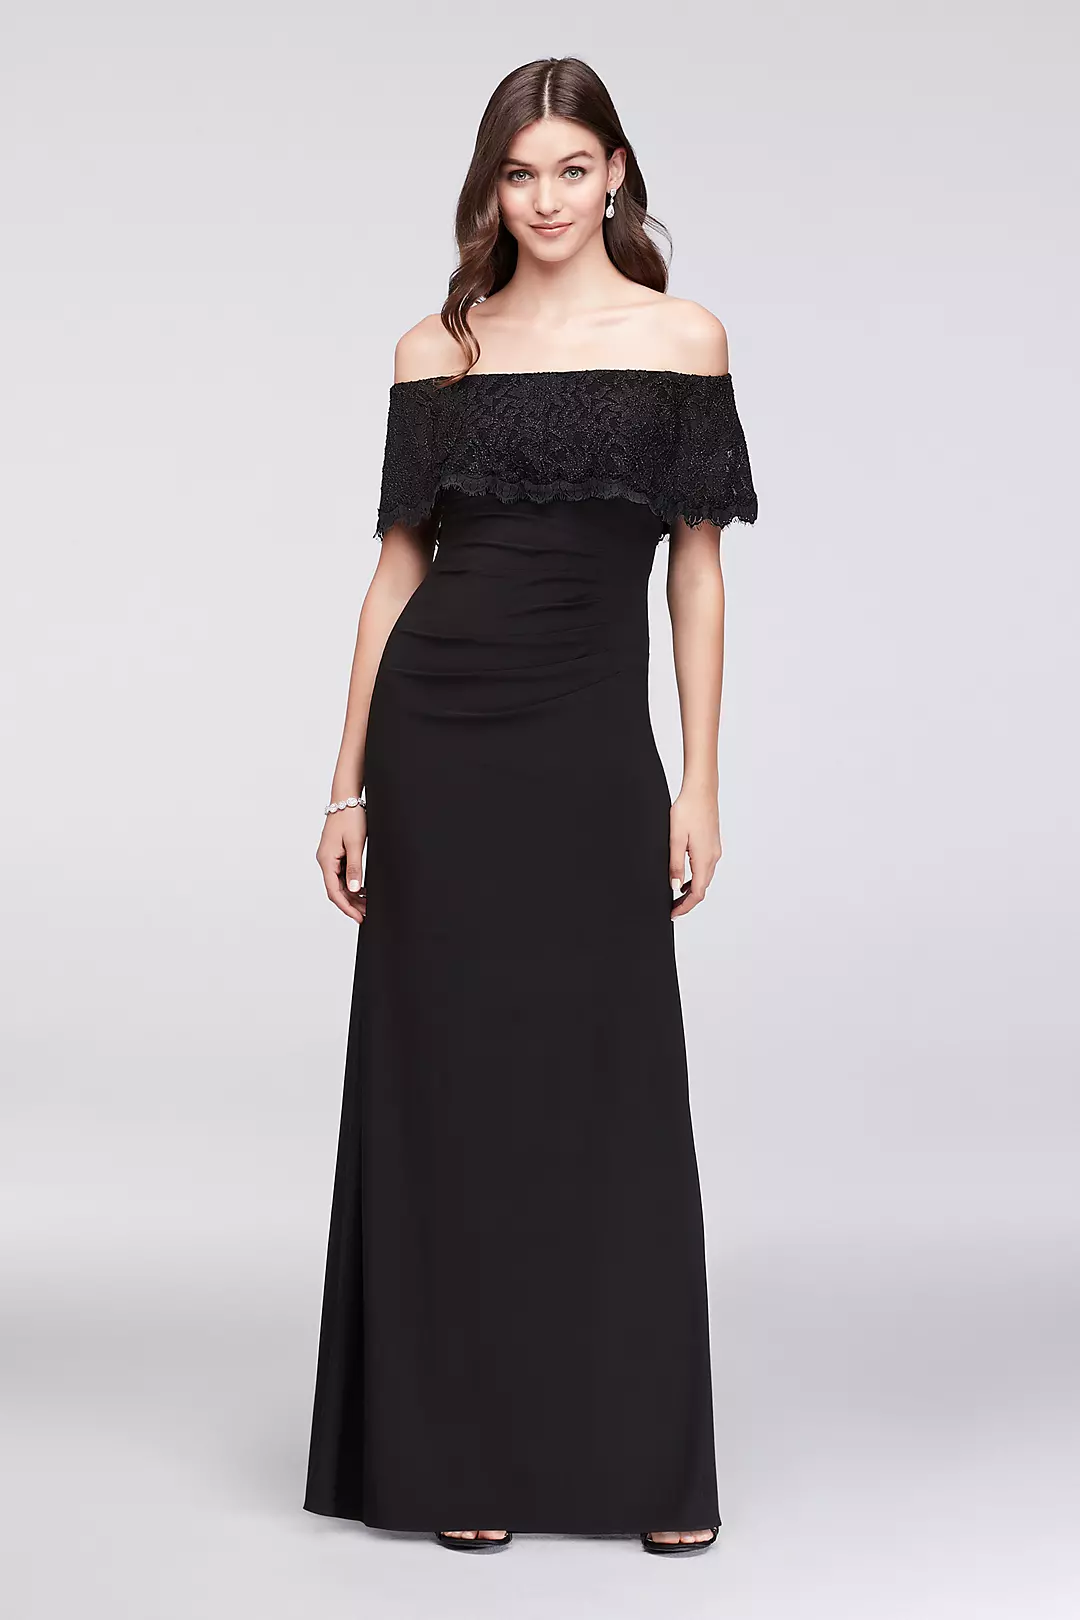 Glitter Lace Off-The-Shoulder Jersey Sheath Gown Image